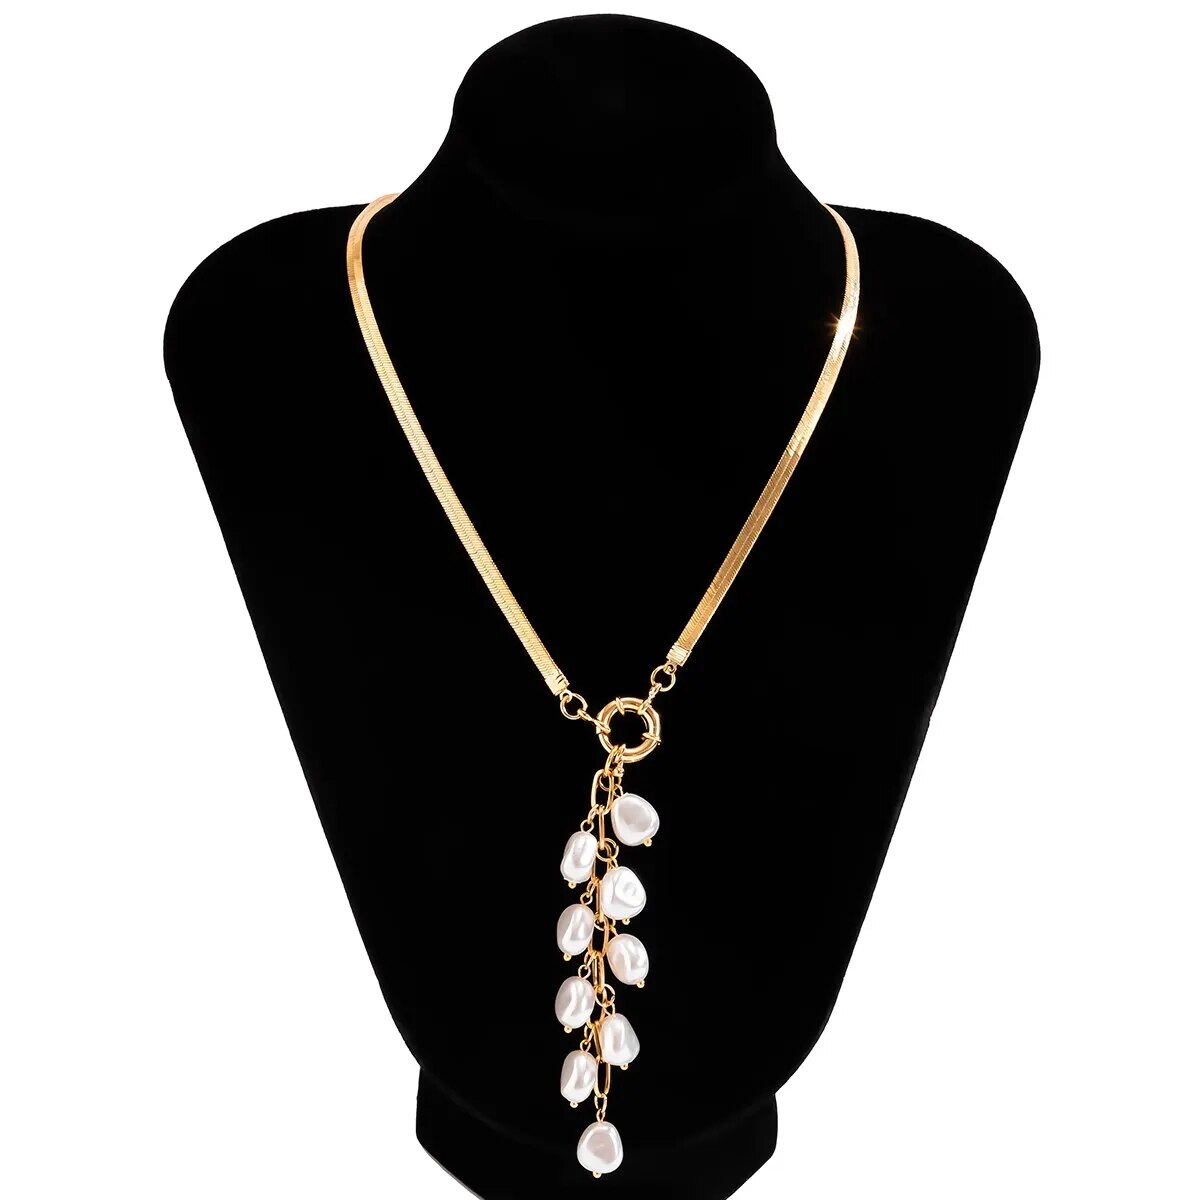 "CLASSY PEARL" Accent Pendant Necklace